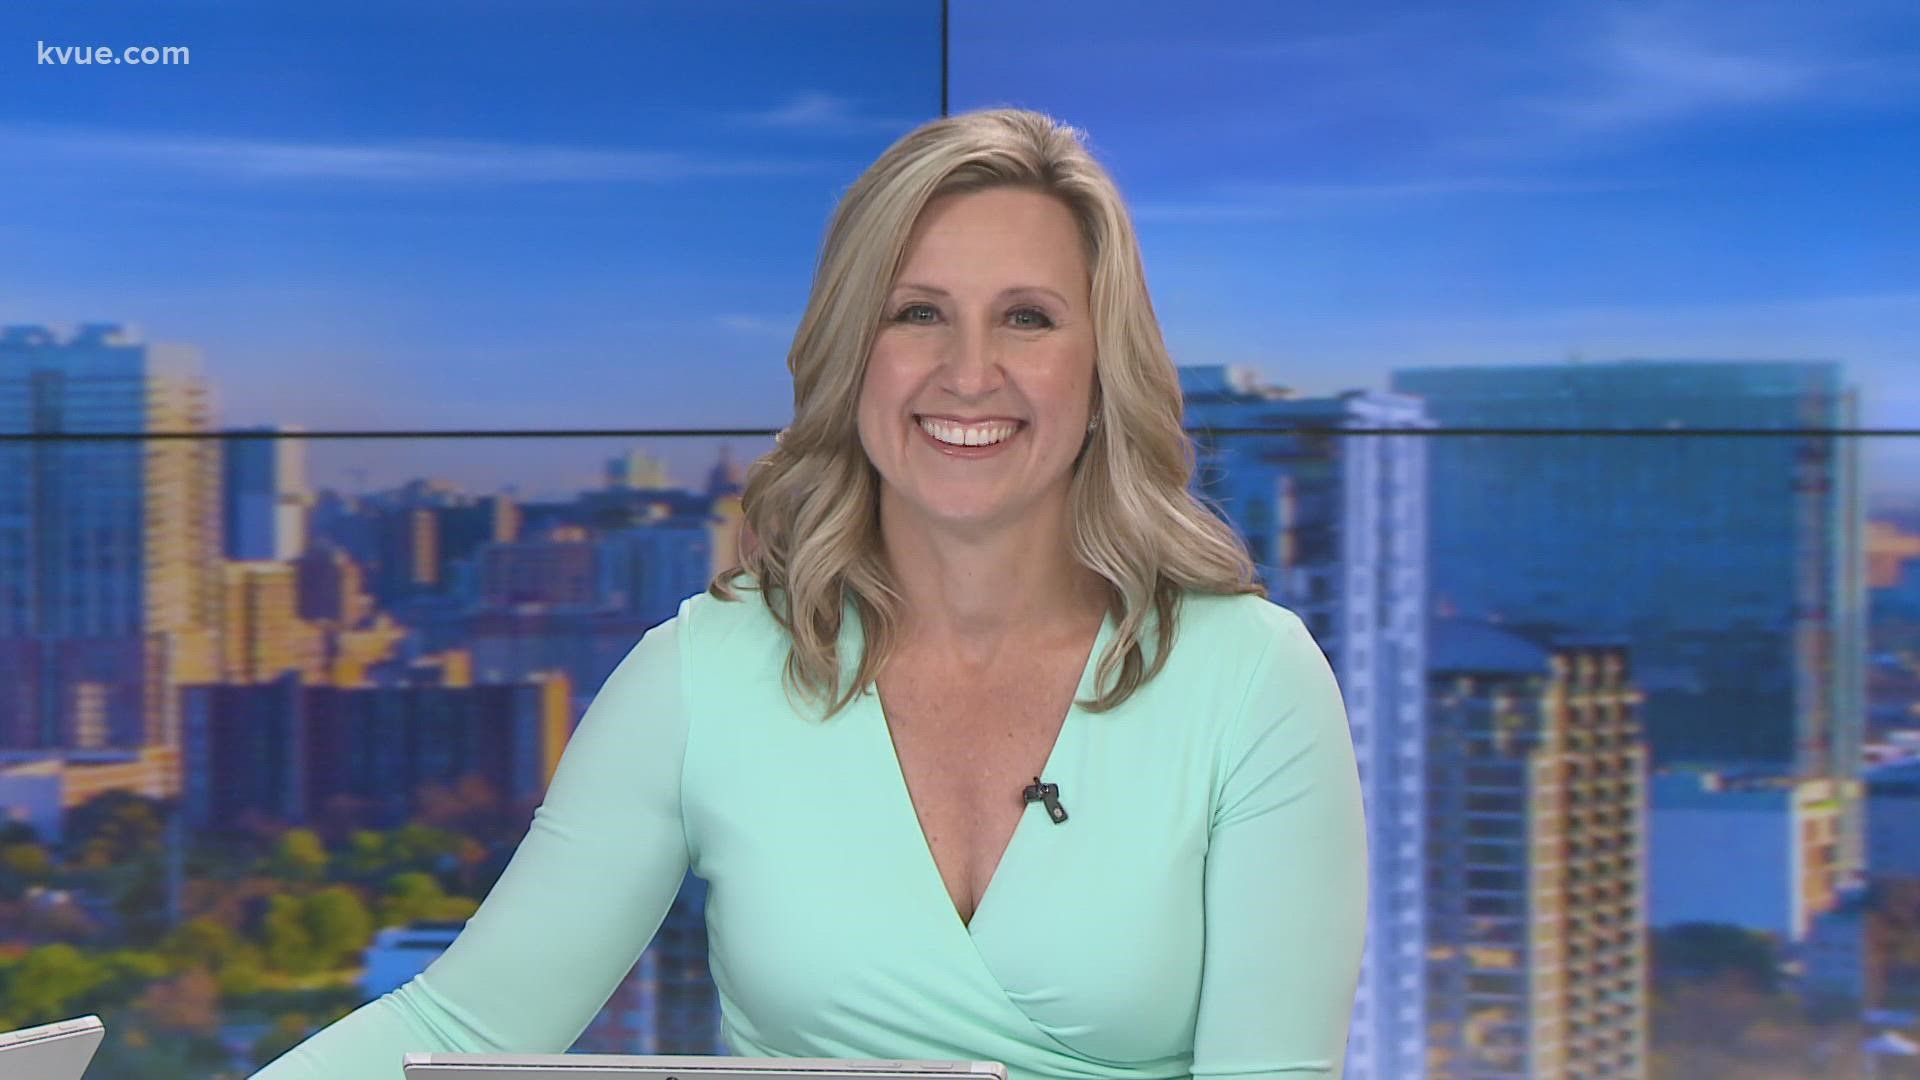 For more than a decade, KVUE Anchor & Reporter Terri Gruca has been one of the top storytellers in Central Texas. Now, after 13 years at KVUE and 30 years in the bus